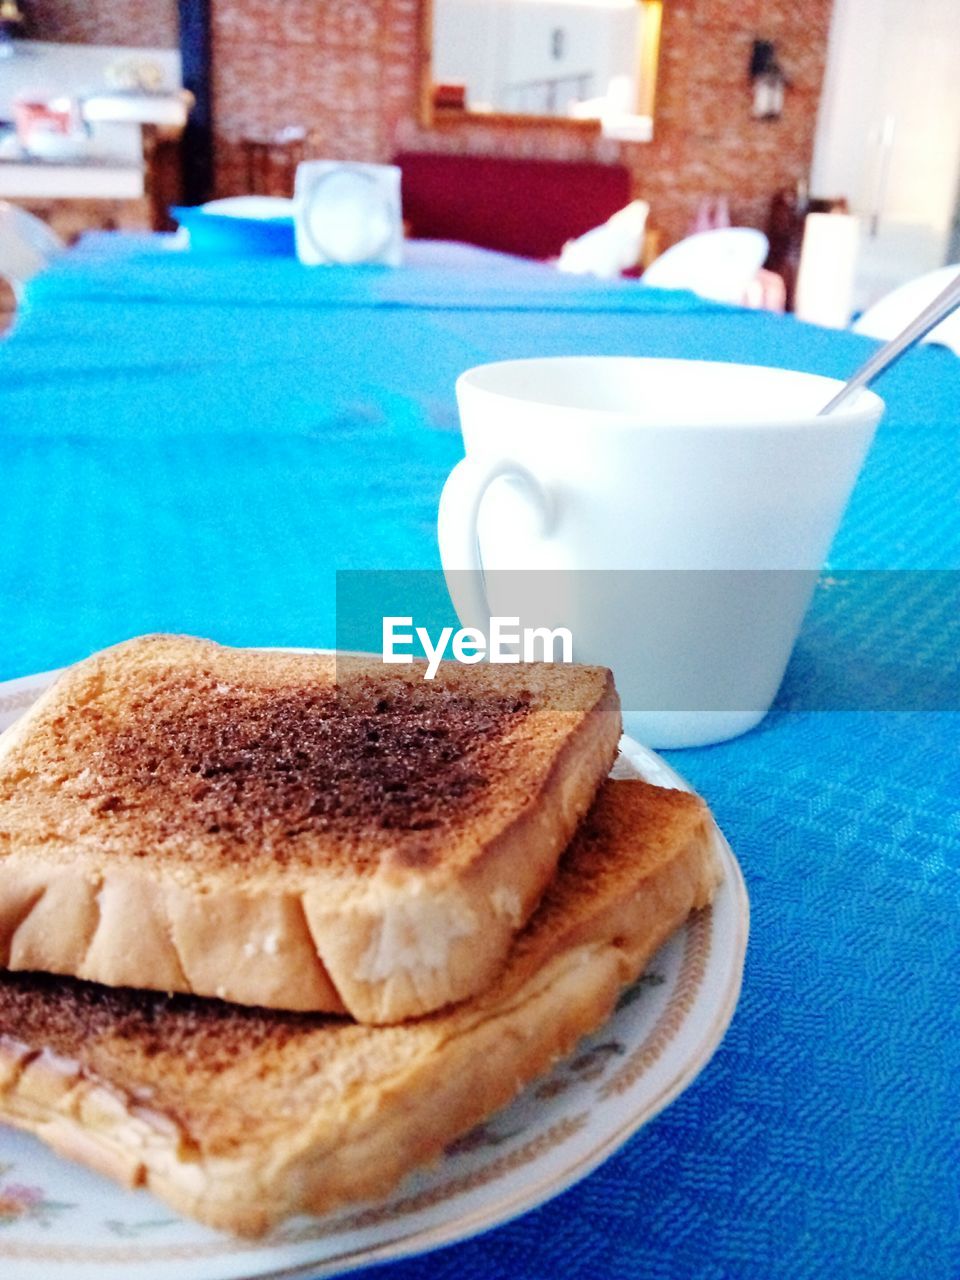 CLOSE-UP OF CUP OF COFFEE WITH BREAD AND DRINK